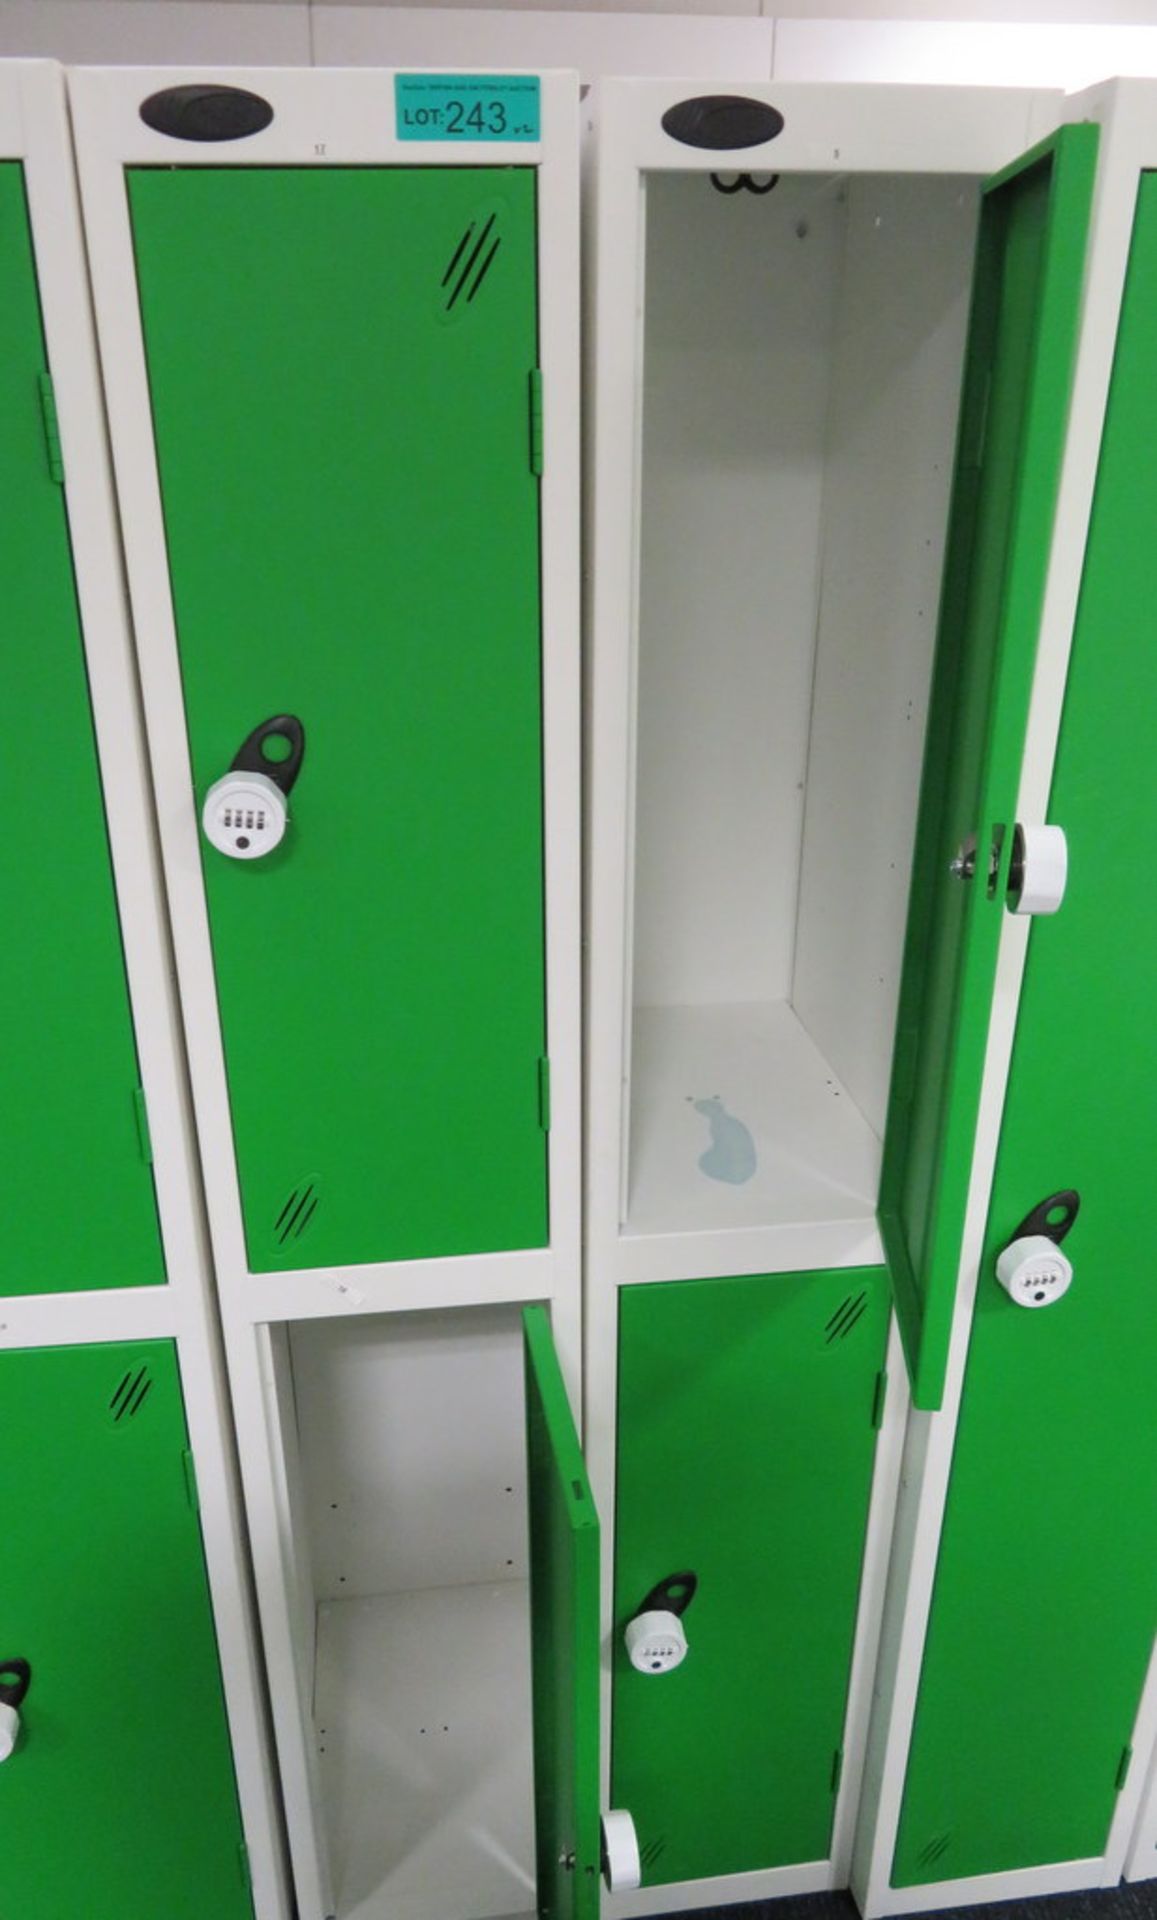 2x Probe 2 Compartment Personnel Lockers. Dimensions: 300x450x1780mm (LxDxH) - Image 2 of 2